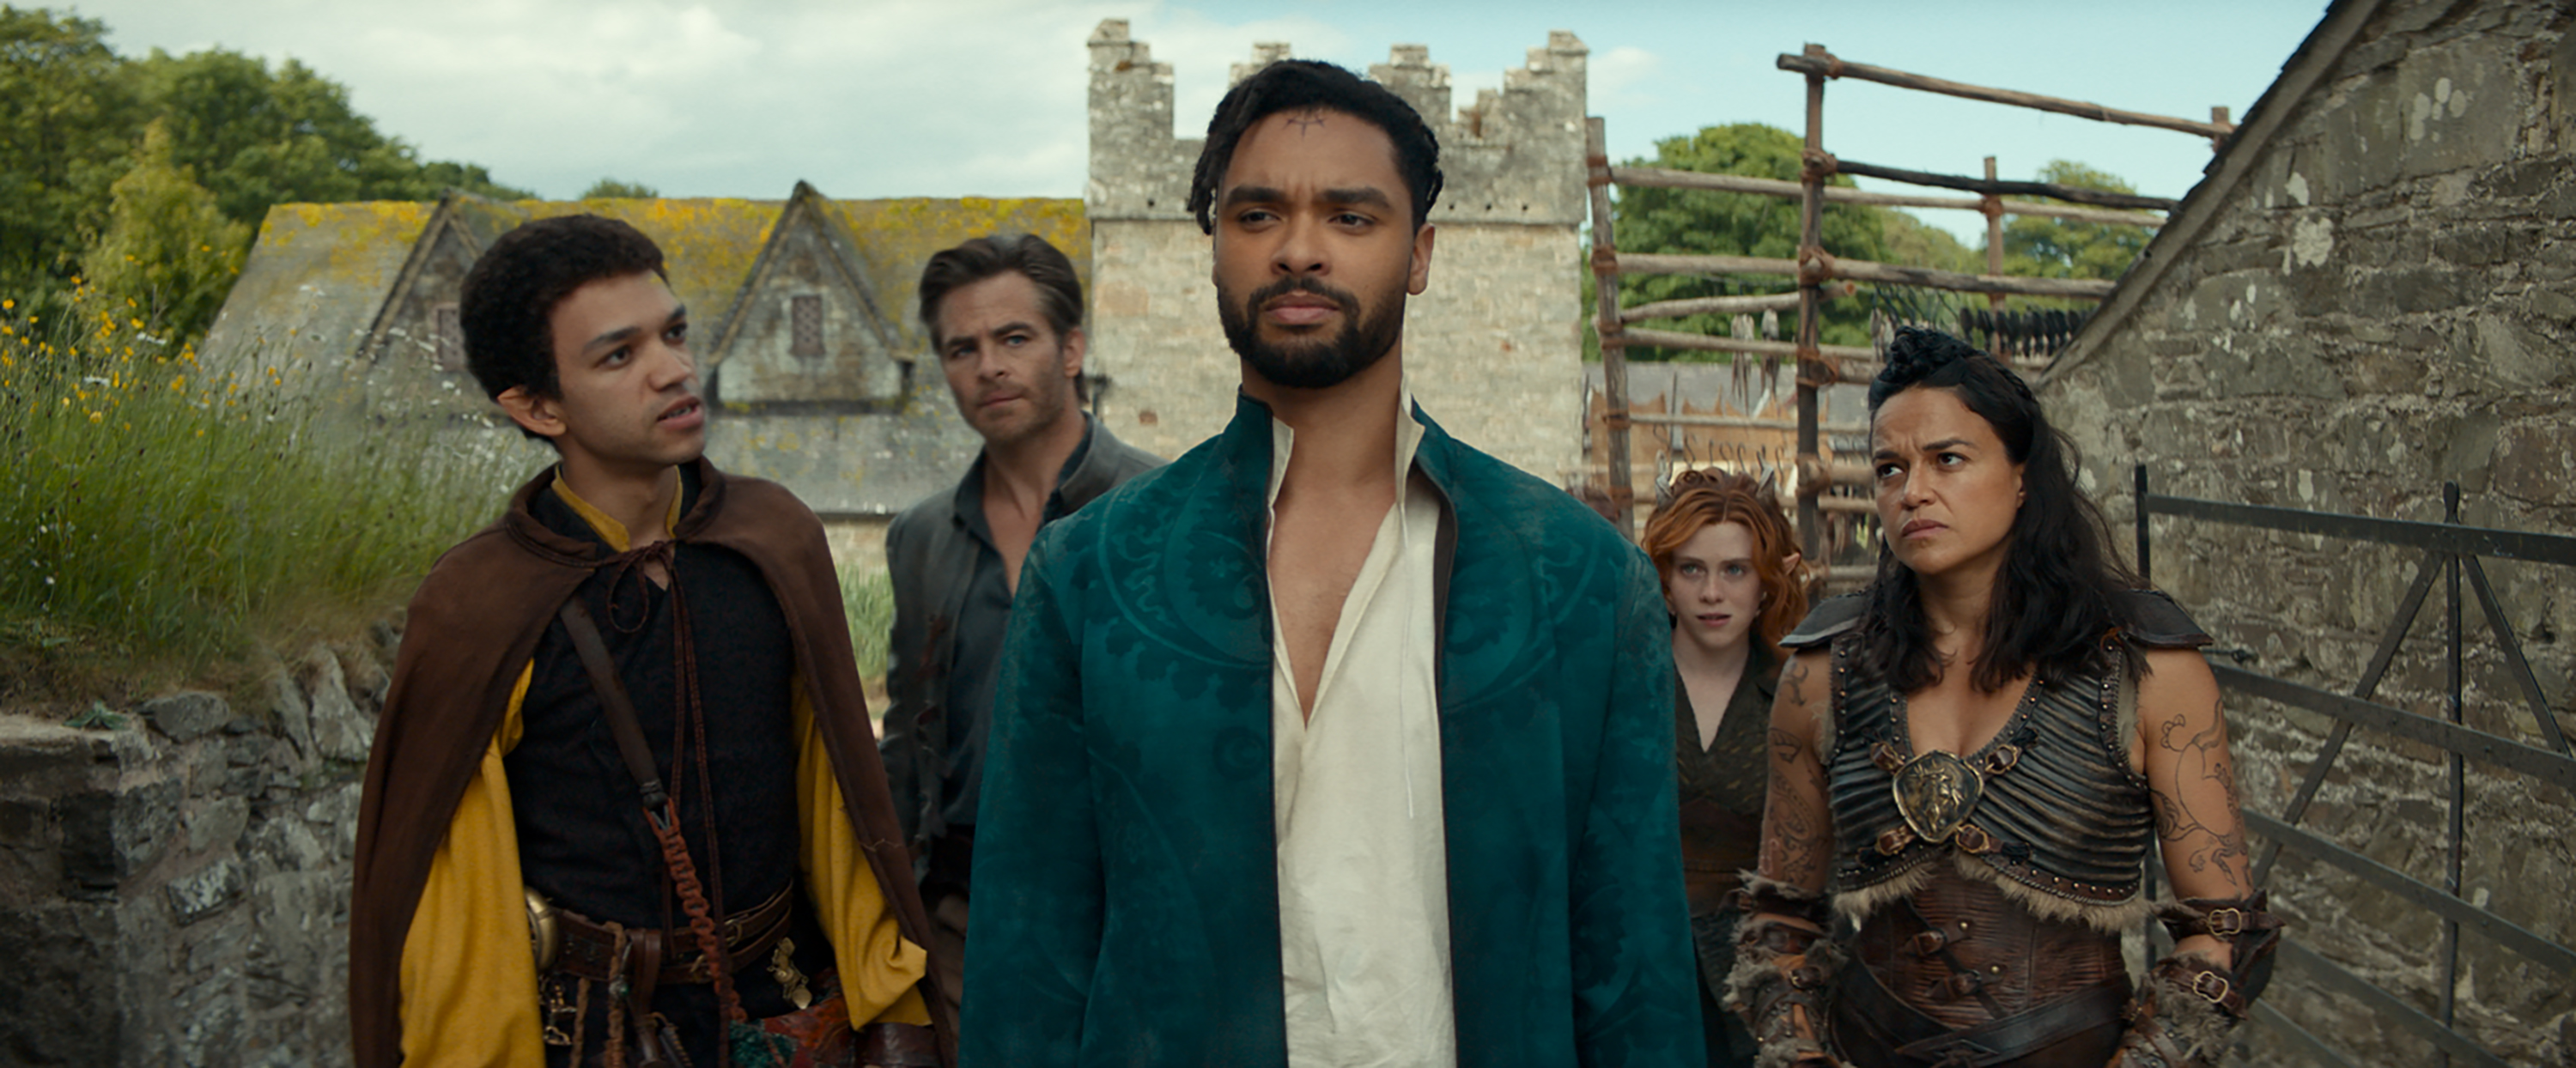 Justice Smith plays Simon, Chris Pine plays Edgin, Rege-Jean Page plays Xenk, Sophia Lillis plays Doric and Michelle Rodriguez plays Holga in 'Dungeons & Dragons: Honor Among Thieves'. Image: Paramount Pictures / eOne / Supplied